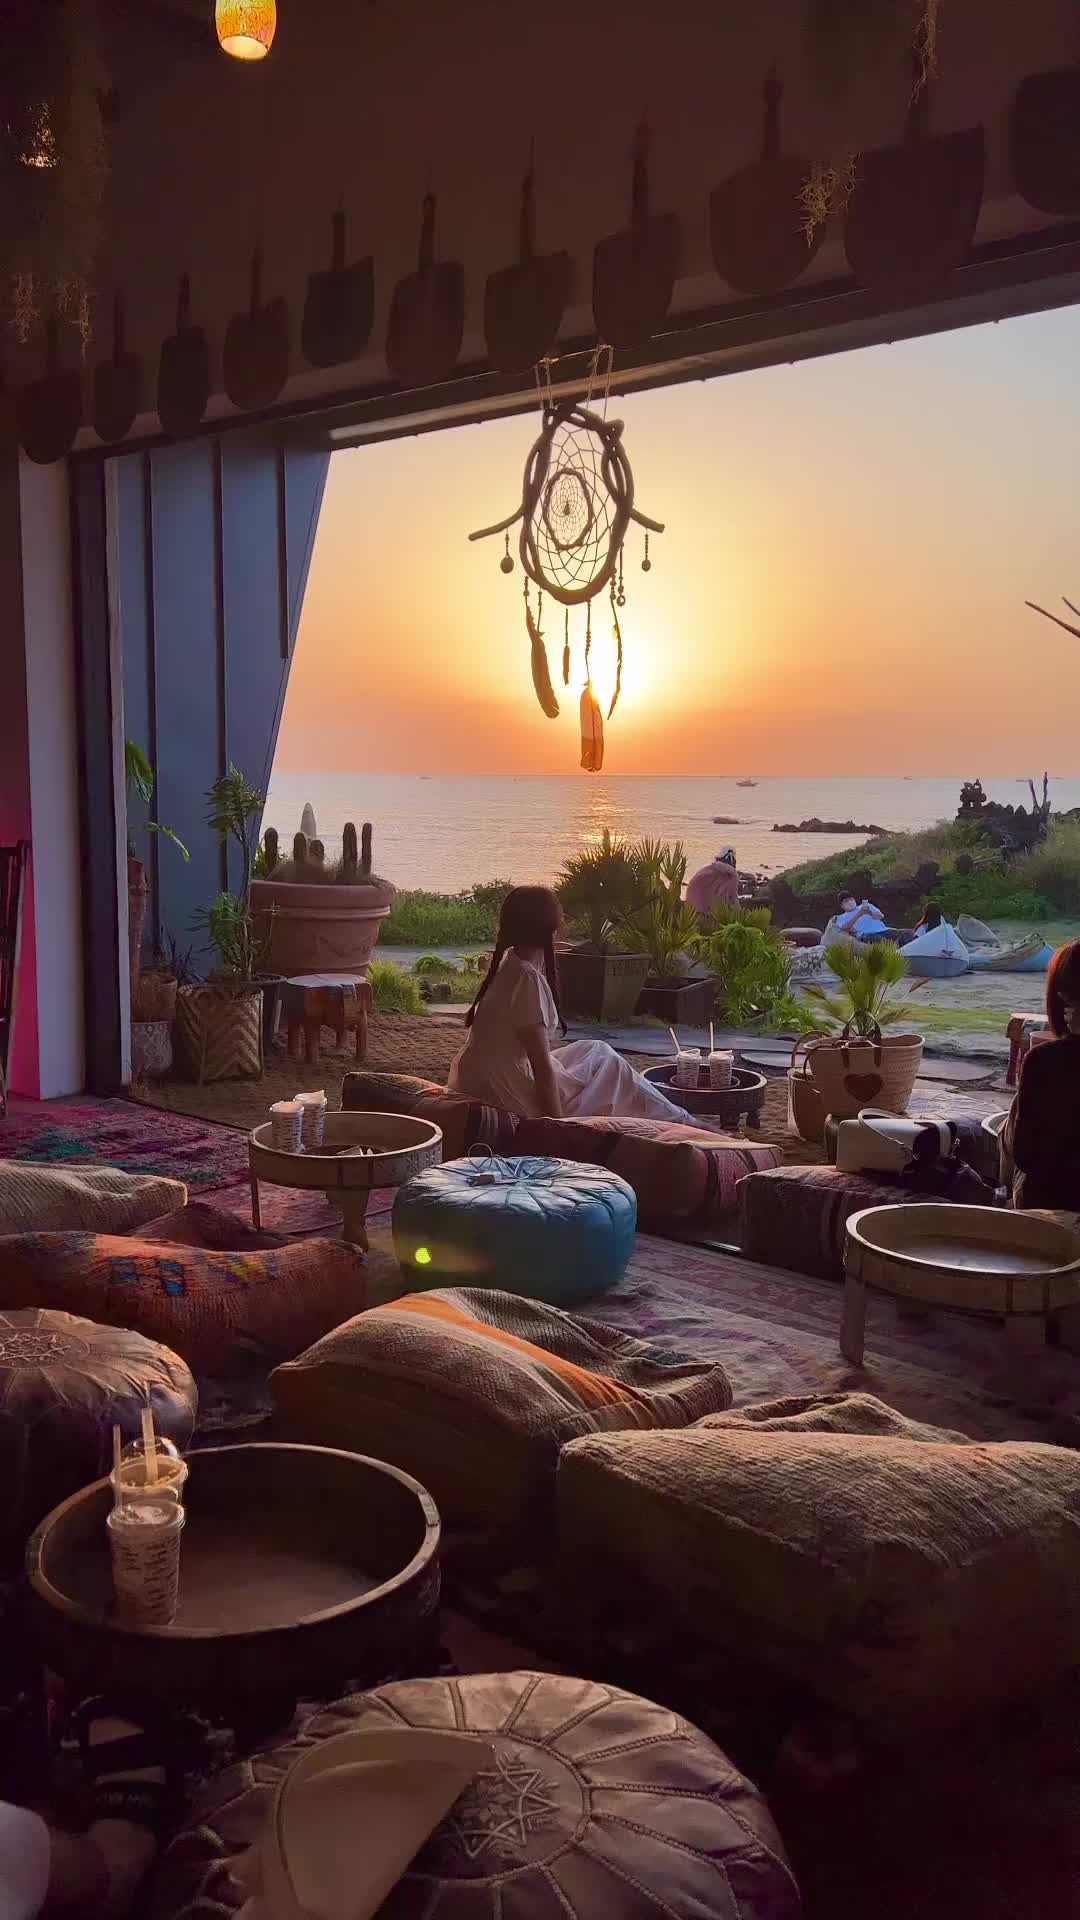 Explore Stunning Sunsets at Moalboal Cafe in Jeju